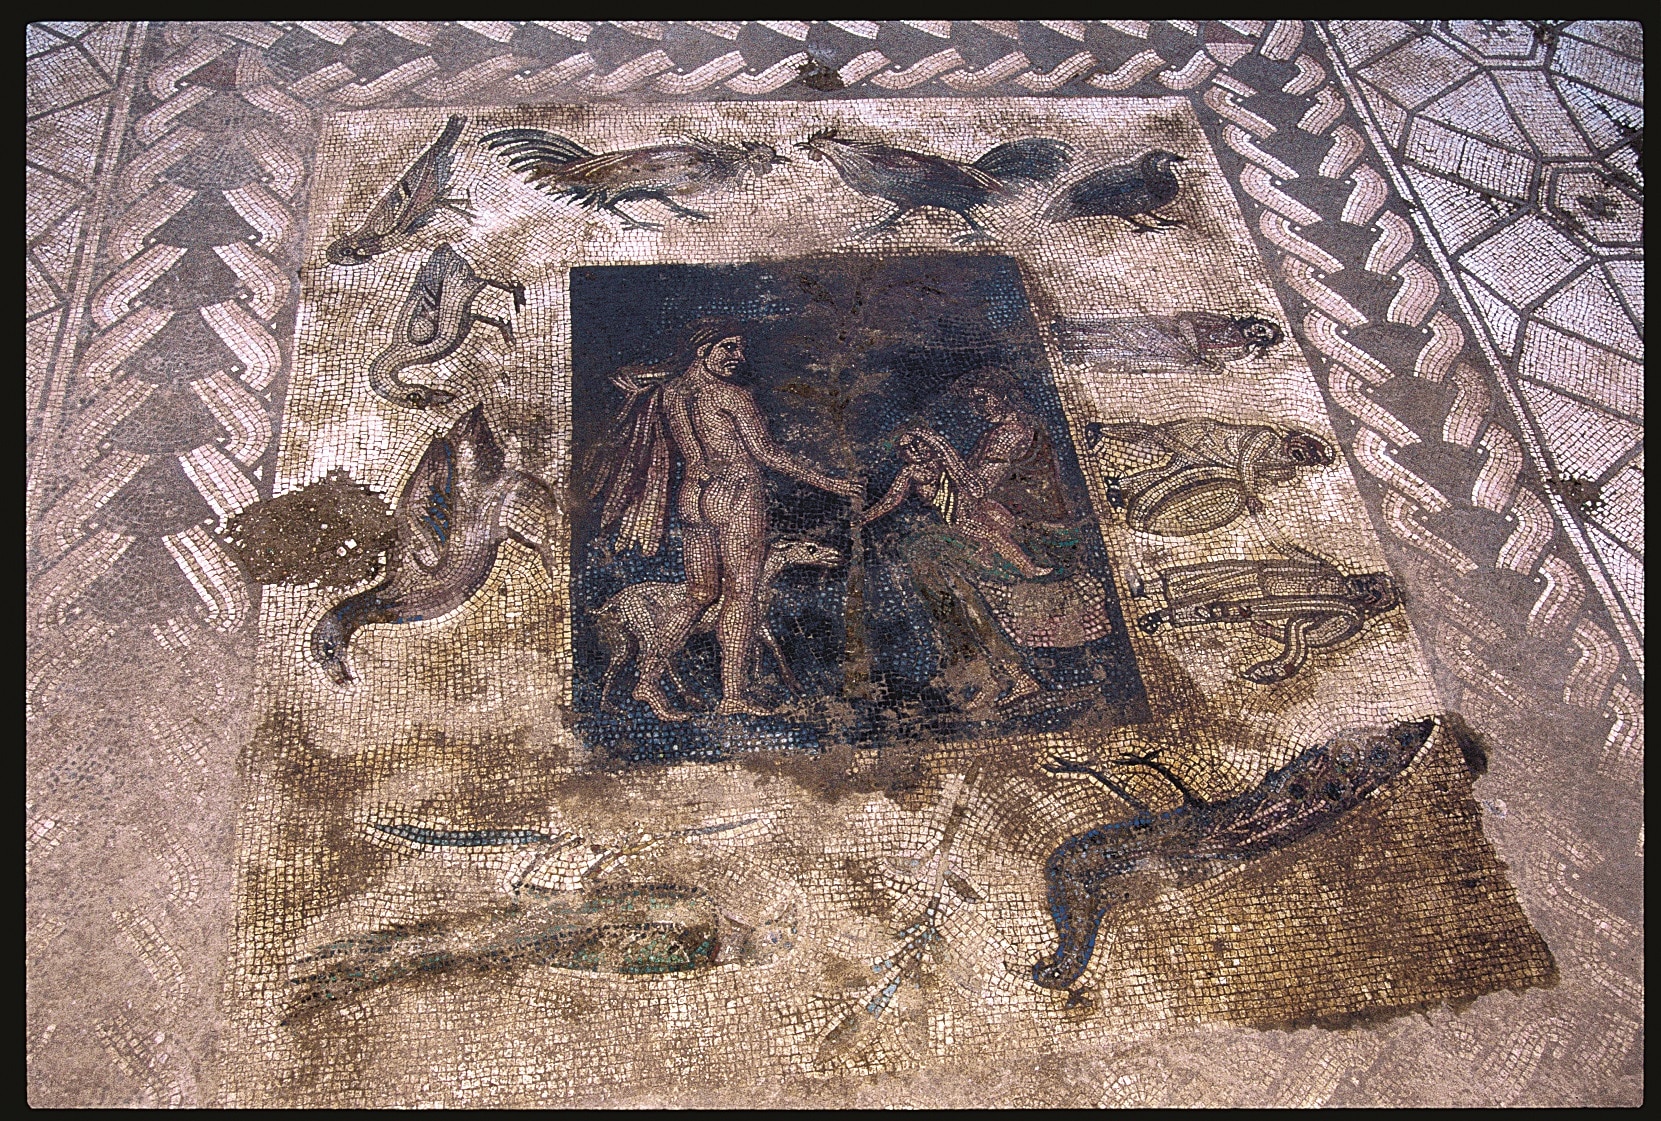 Mosaic floor with scene inspired by Bacchus